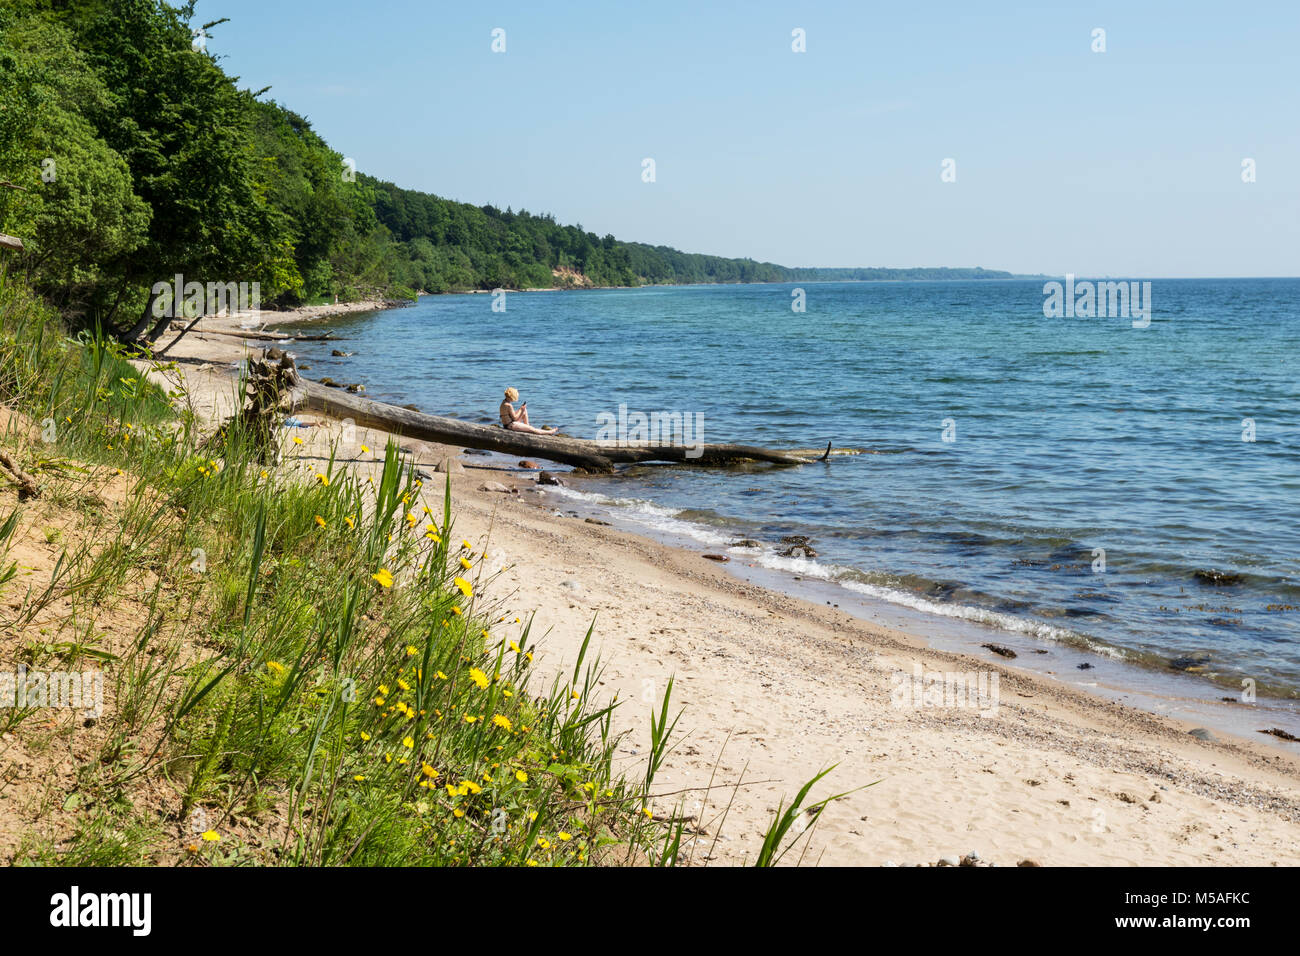 Woman relaxing on a tree trunk on the beach at Staksrode Skov Stock Photo